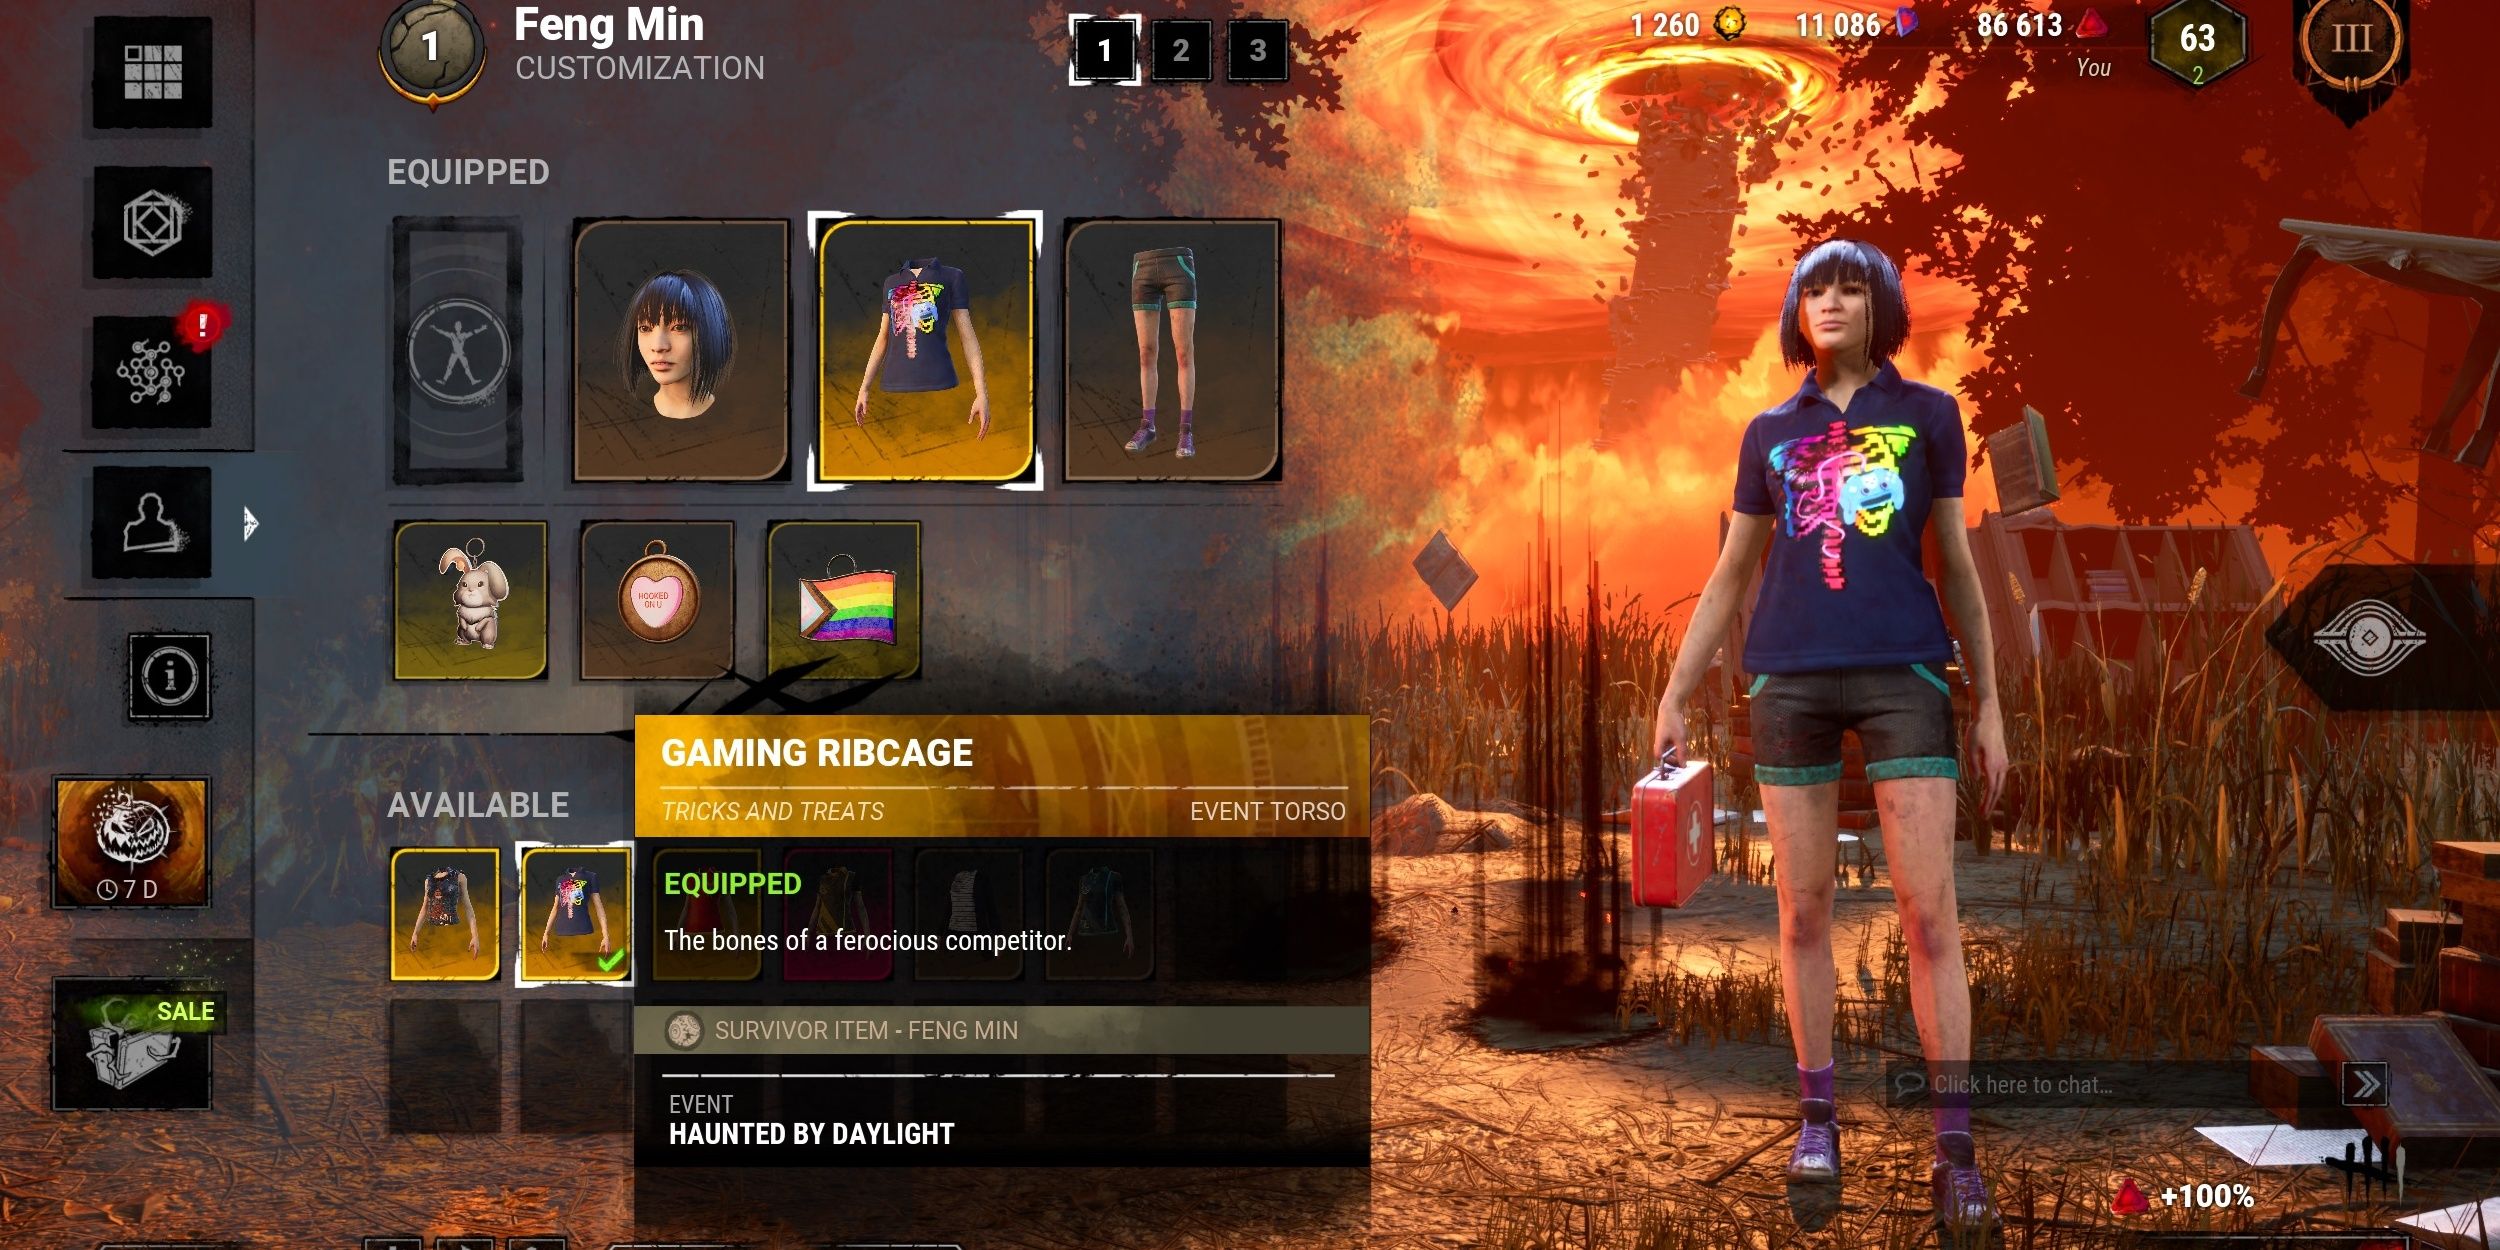 Feng Min looking like a pro gamer in the Gaming Ribcage chest cosmetic